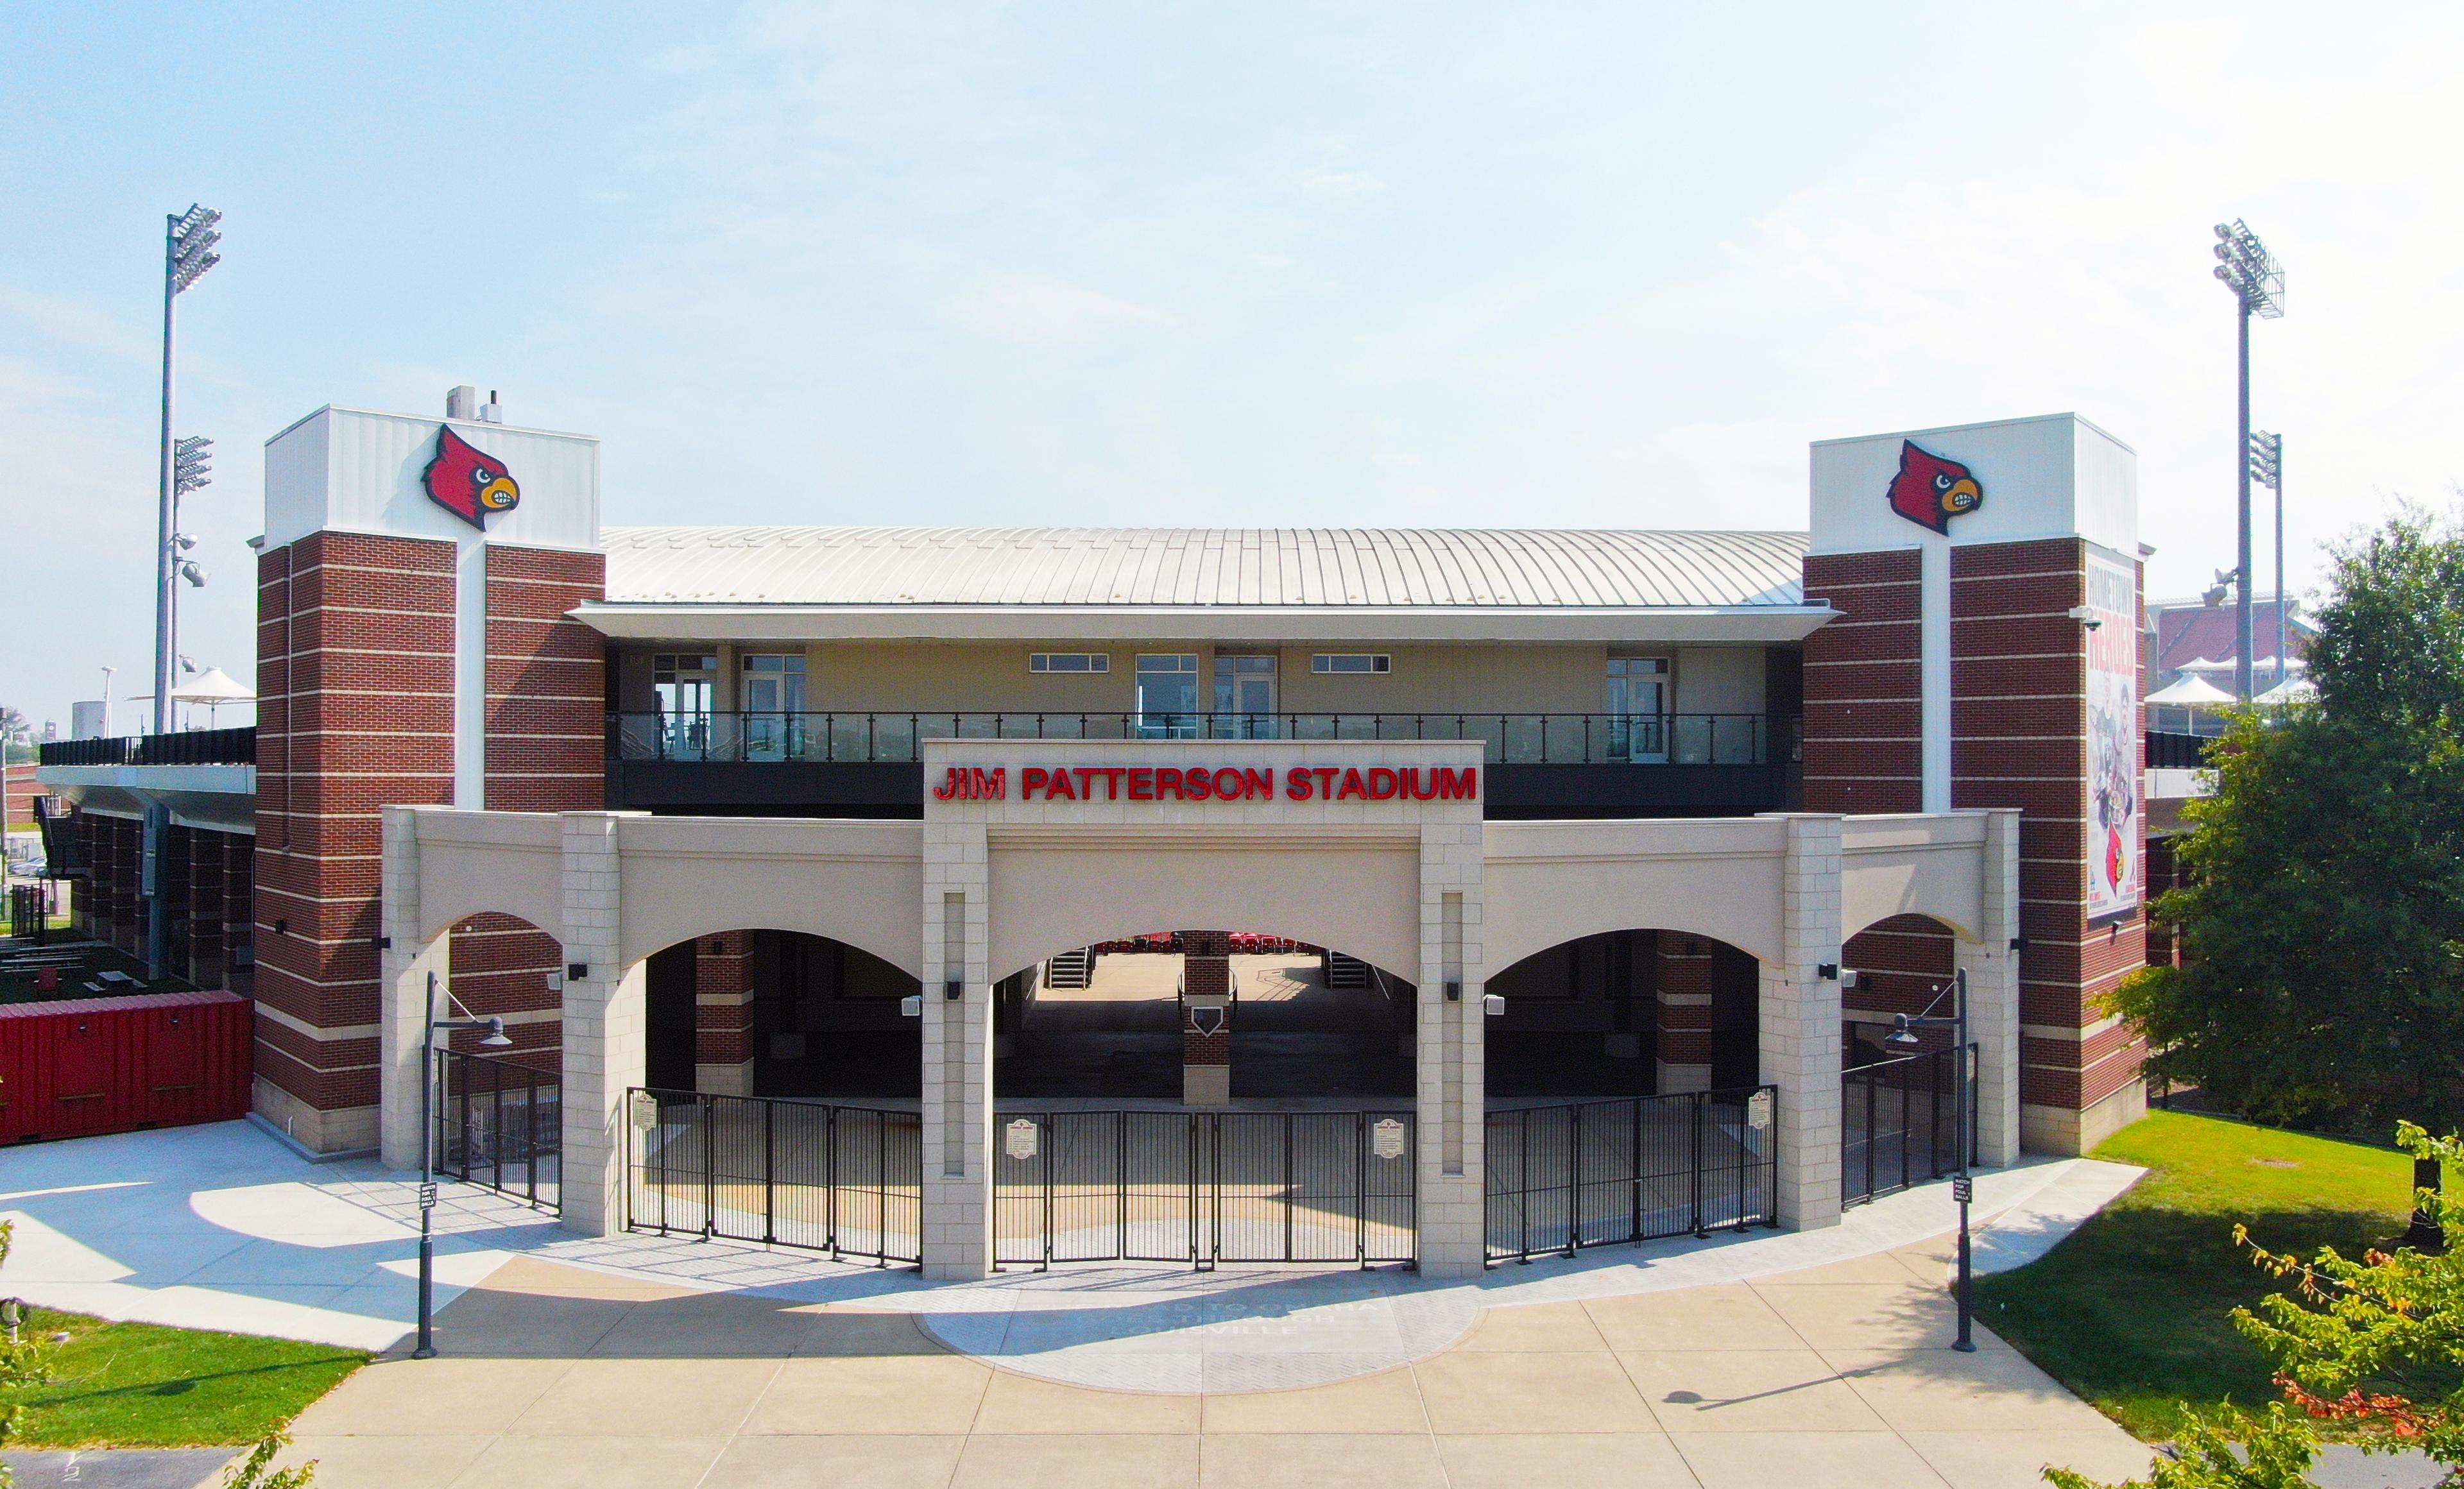 Exterior view of the entrance to Jim Patterson stadium in Louisville, KY.